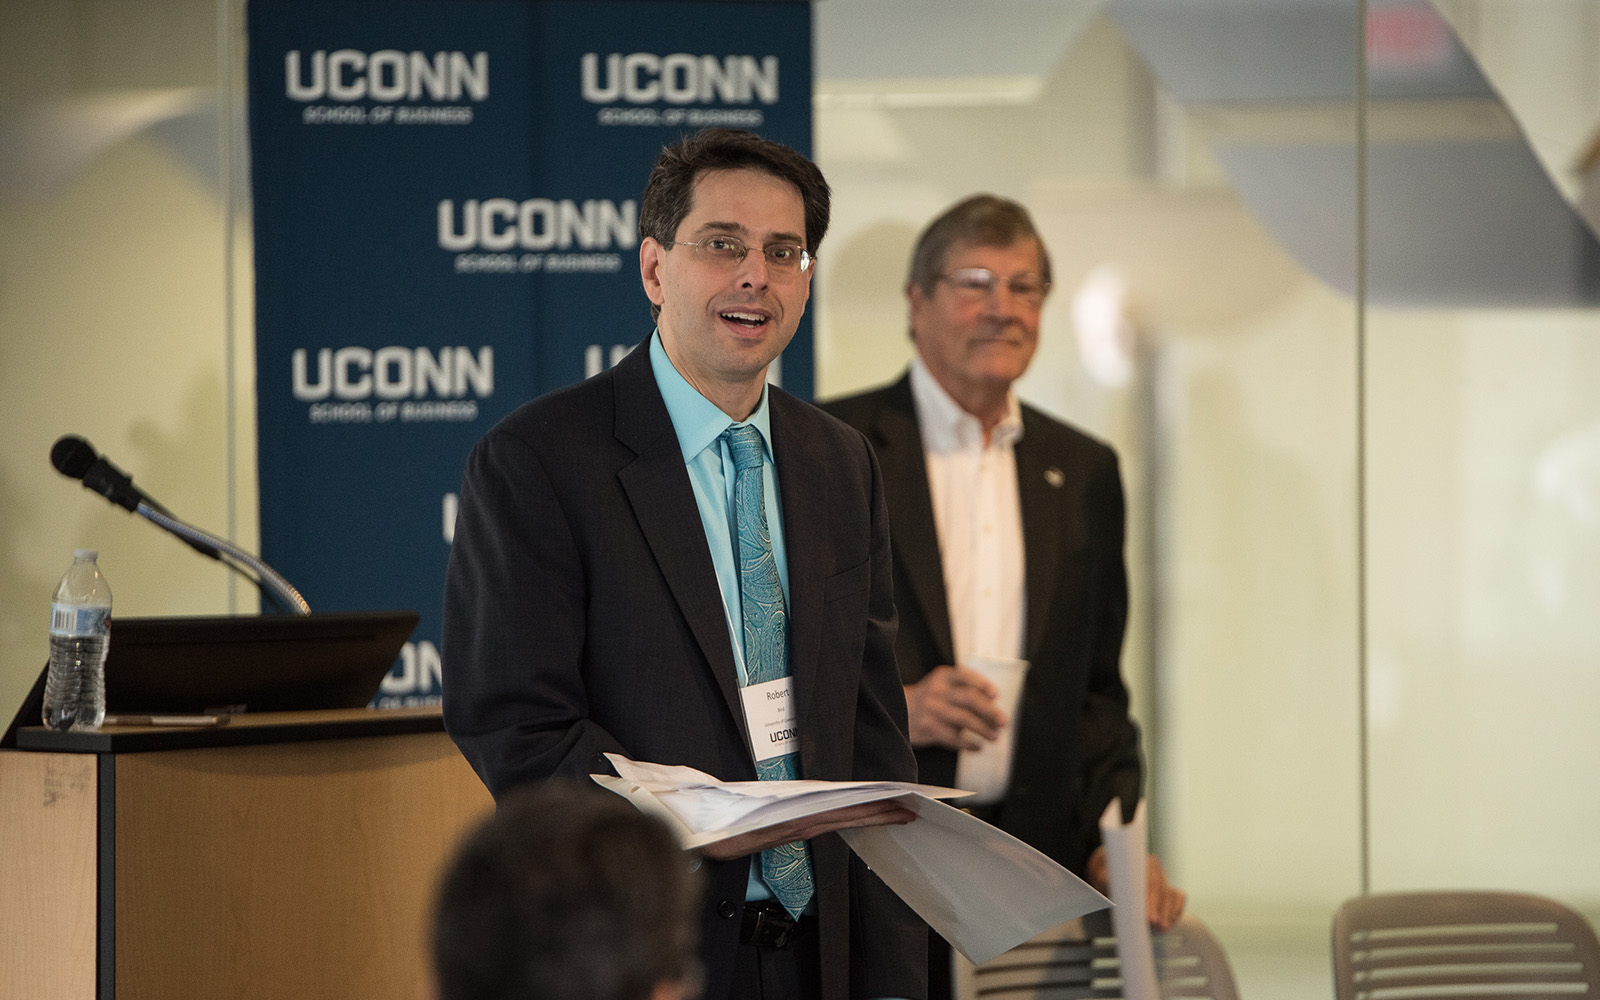 Professor Robert Bird (left) speaks during the Summit on the Academic Profession of Business Law, with Interim Provost John Elliott (Right) behind him. (Nathan Oldham / UConn School of Business) 